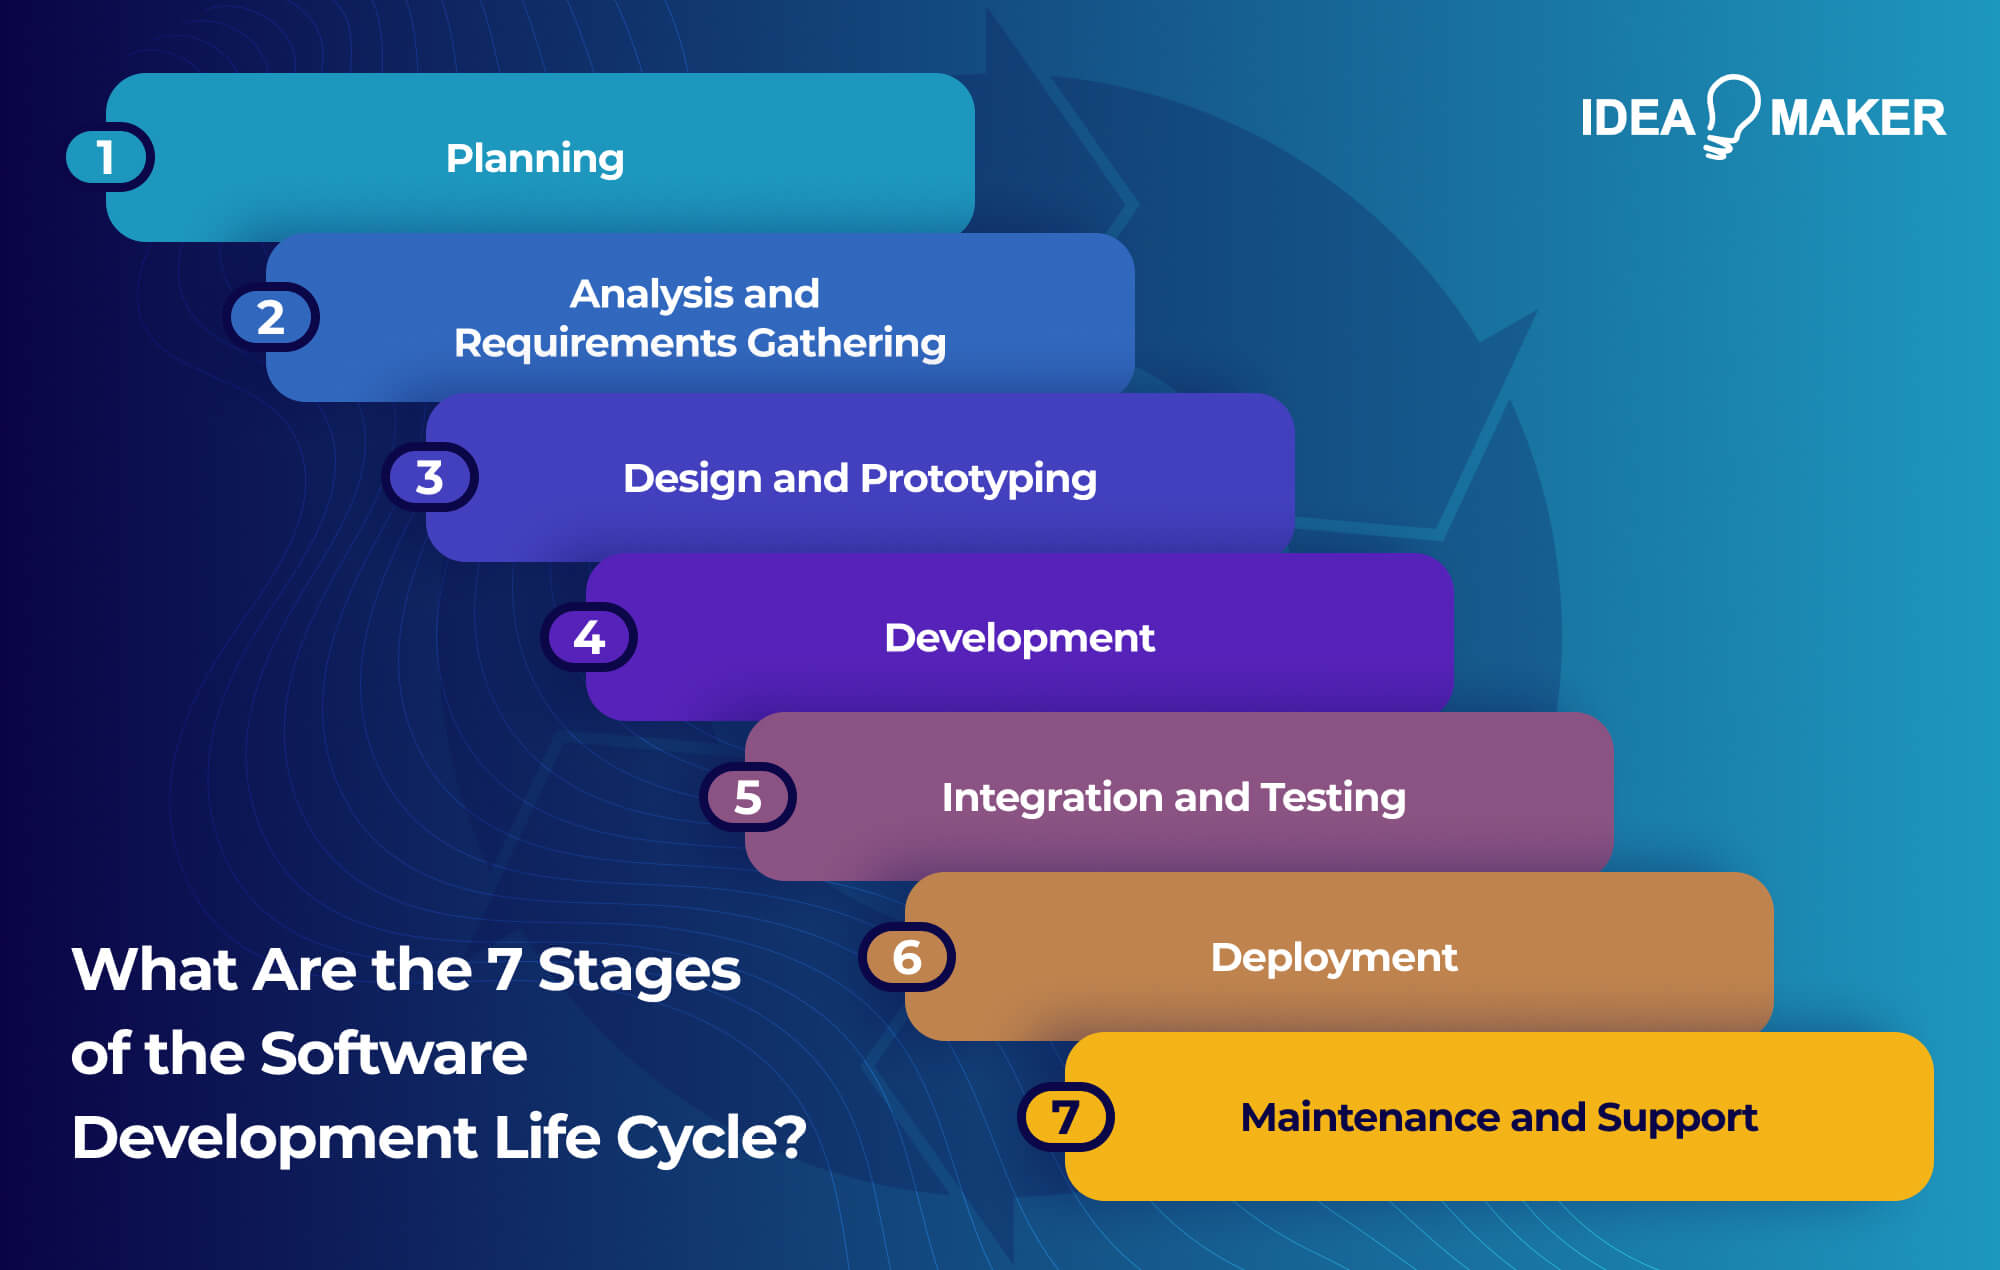 Ideamaker - What Are the 7 Stages of the Software Development Life Cycle_